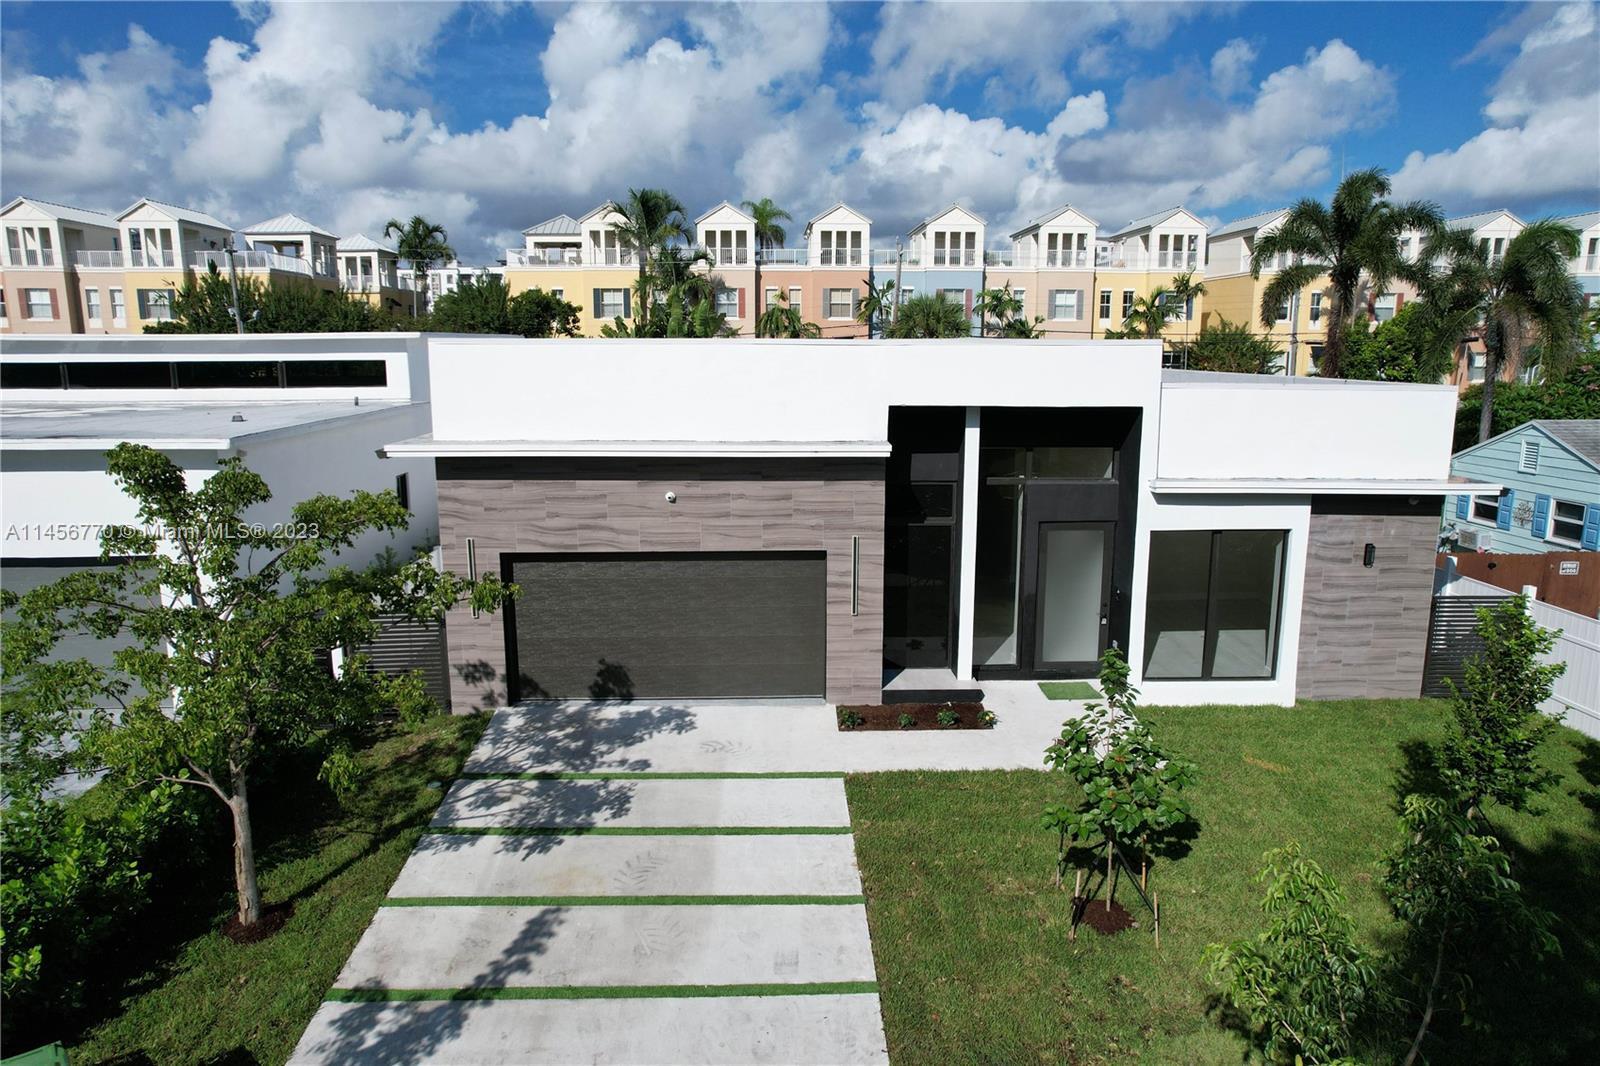 Step into the epitome of modern luxury living! This exquisite estate offers 4 bedrooms and 3 bathroo